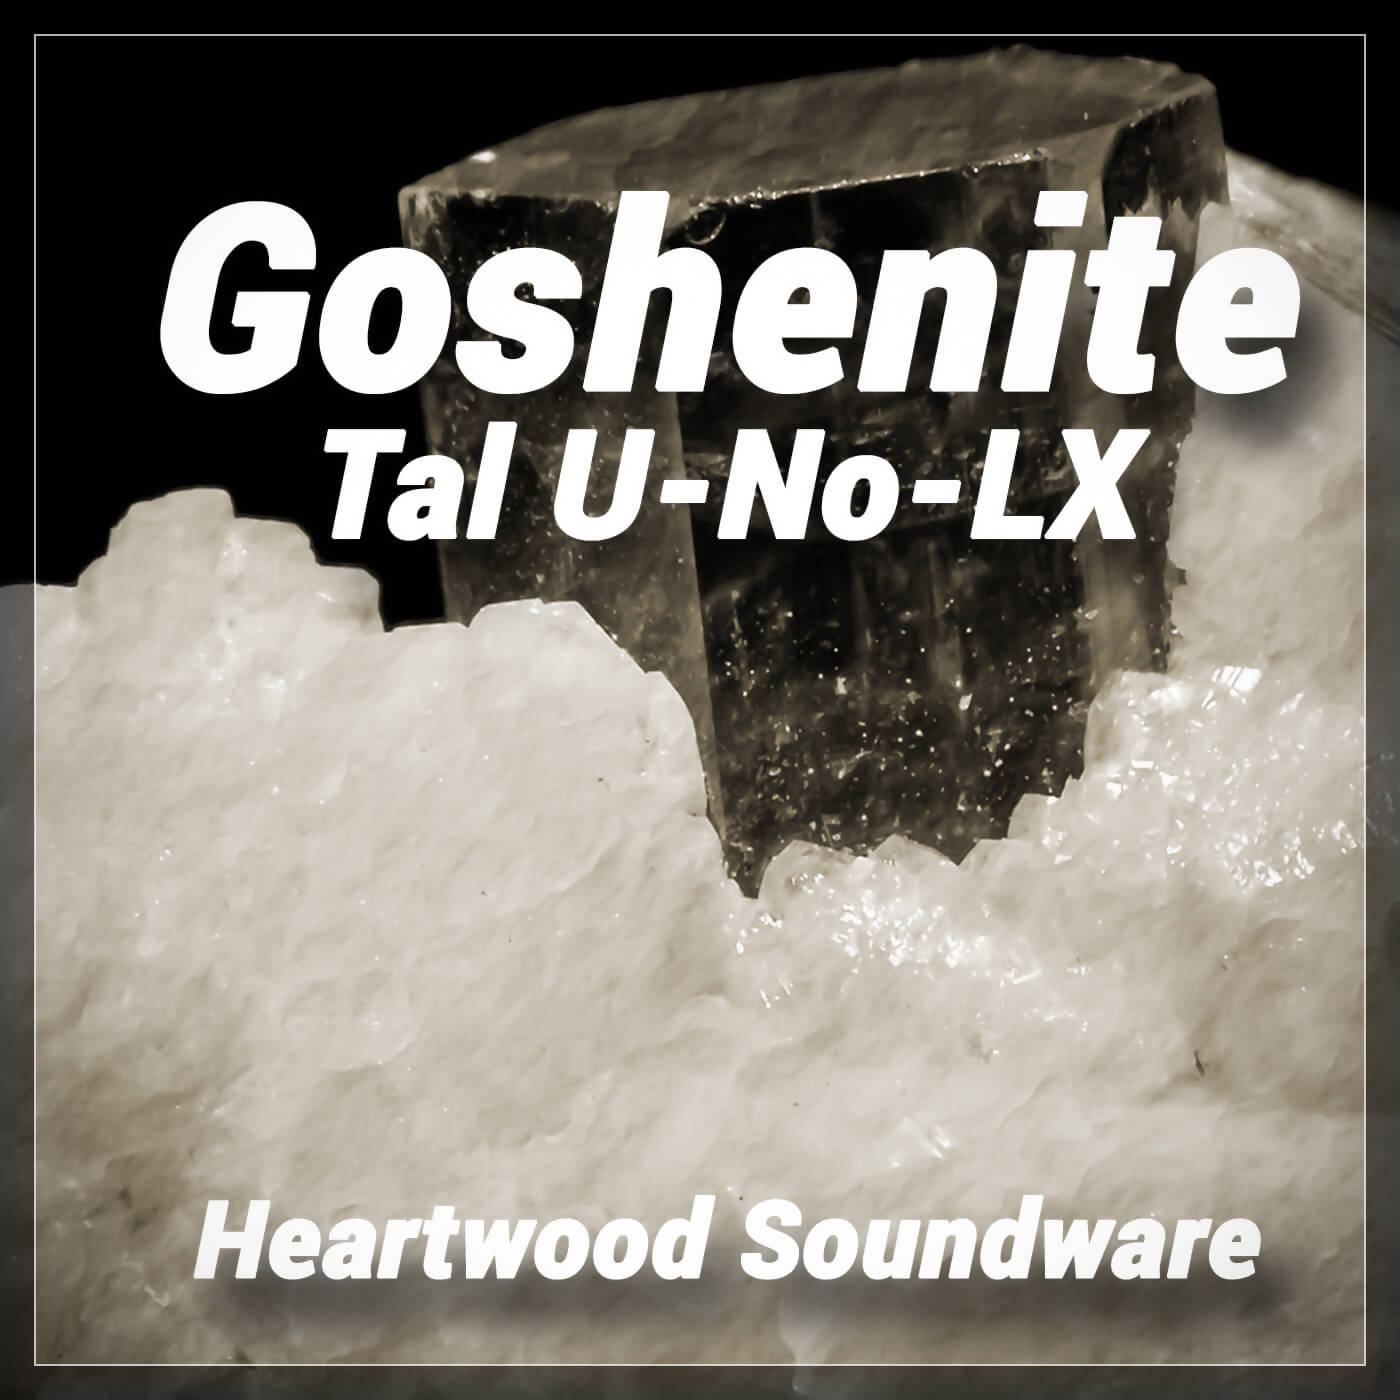 111 presets for Tal-u-no-lx A soundset pack full of retro sounds. Taking advantage of U-No LX’s undisputed strengths bringing you sounds full of bright and clean synths, huge basses and driving sequencer patterns, all with that classic Juno chorus